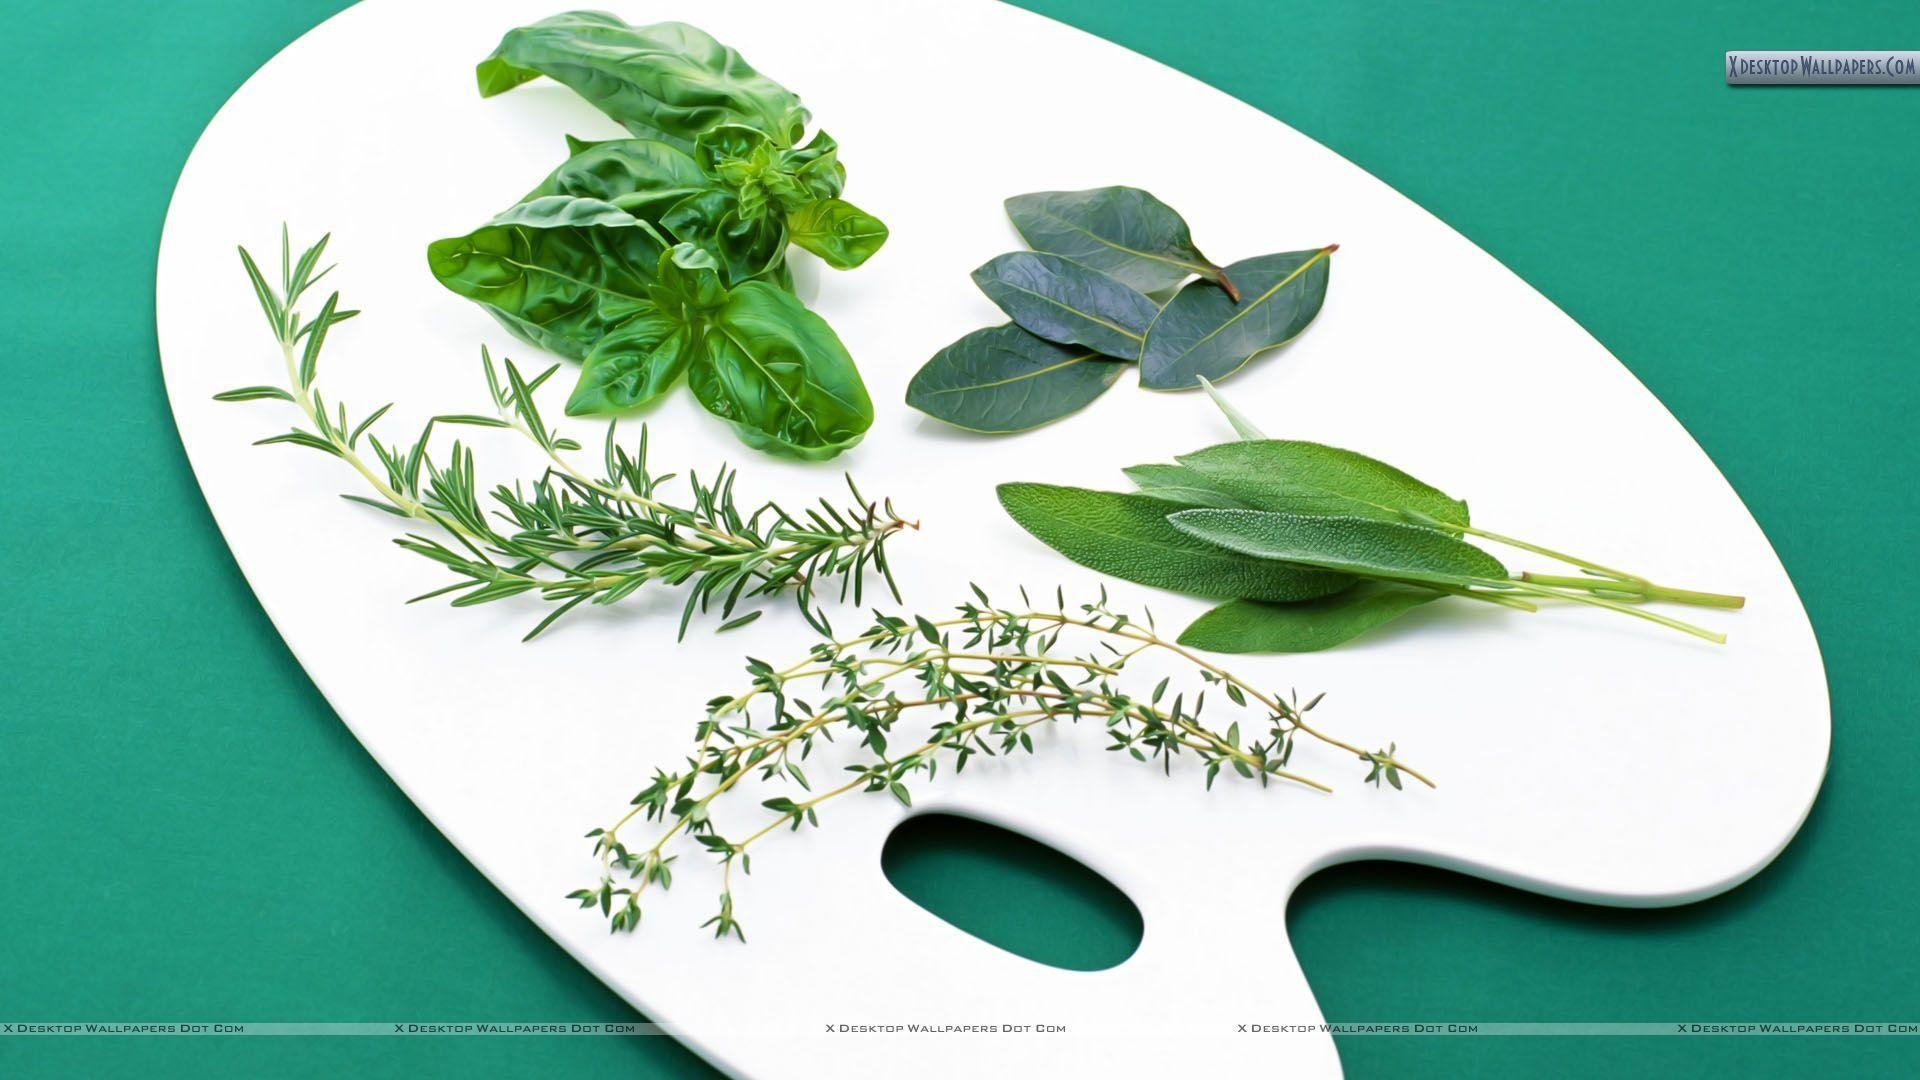 Culinary Herbs Wall Mural  Buy online at Europosters